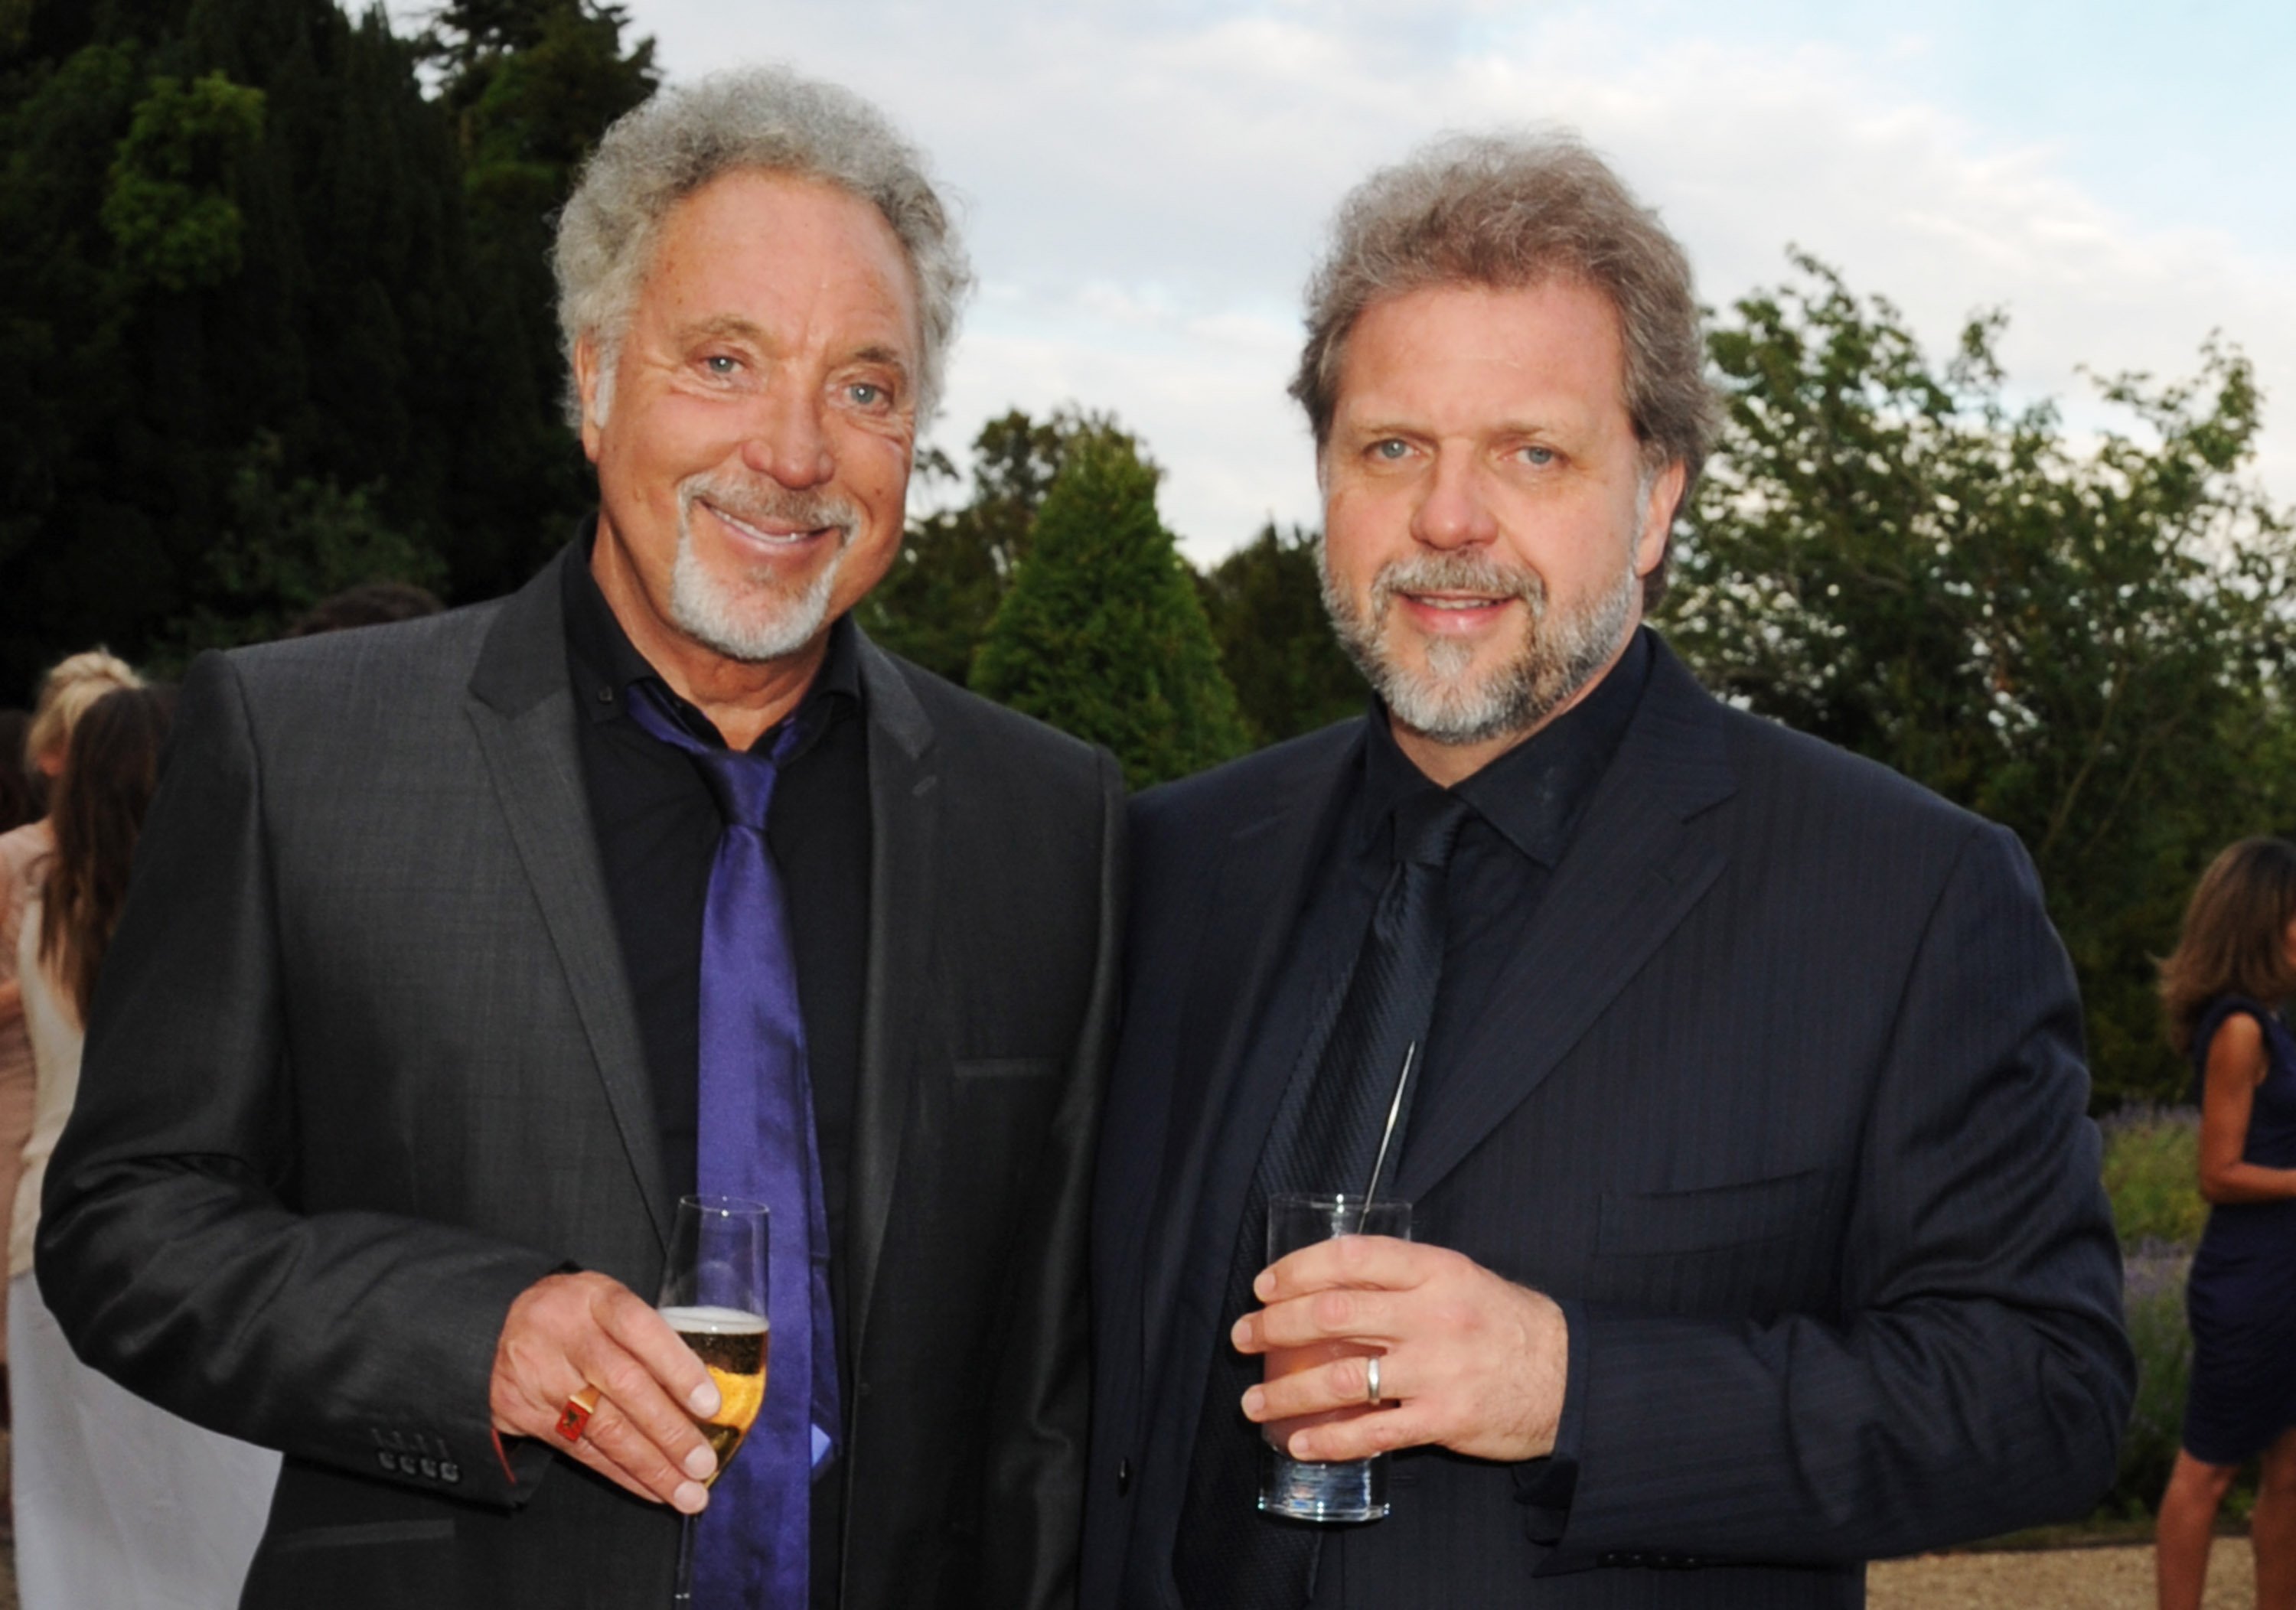 Tom Jones and his son Mark Woodward. July 10, 2010 | Source: Getty Images